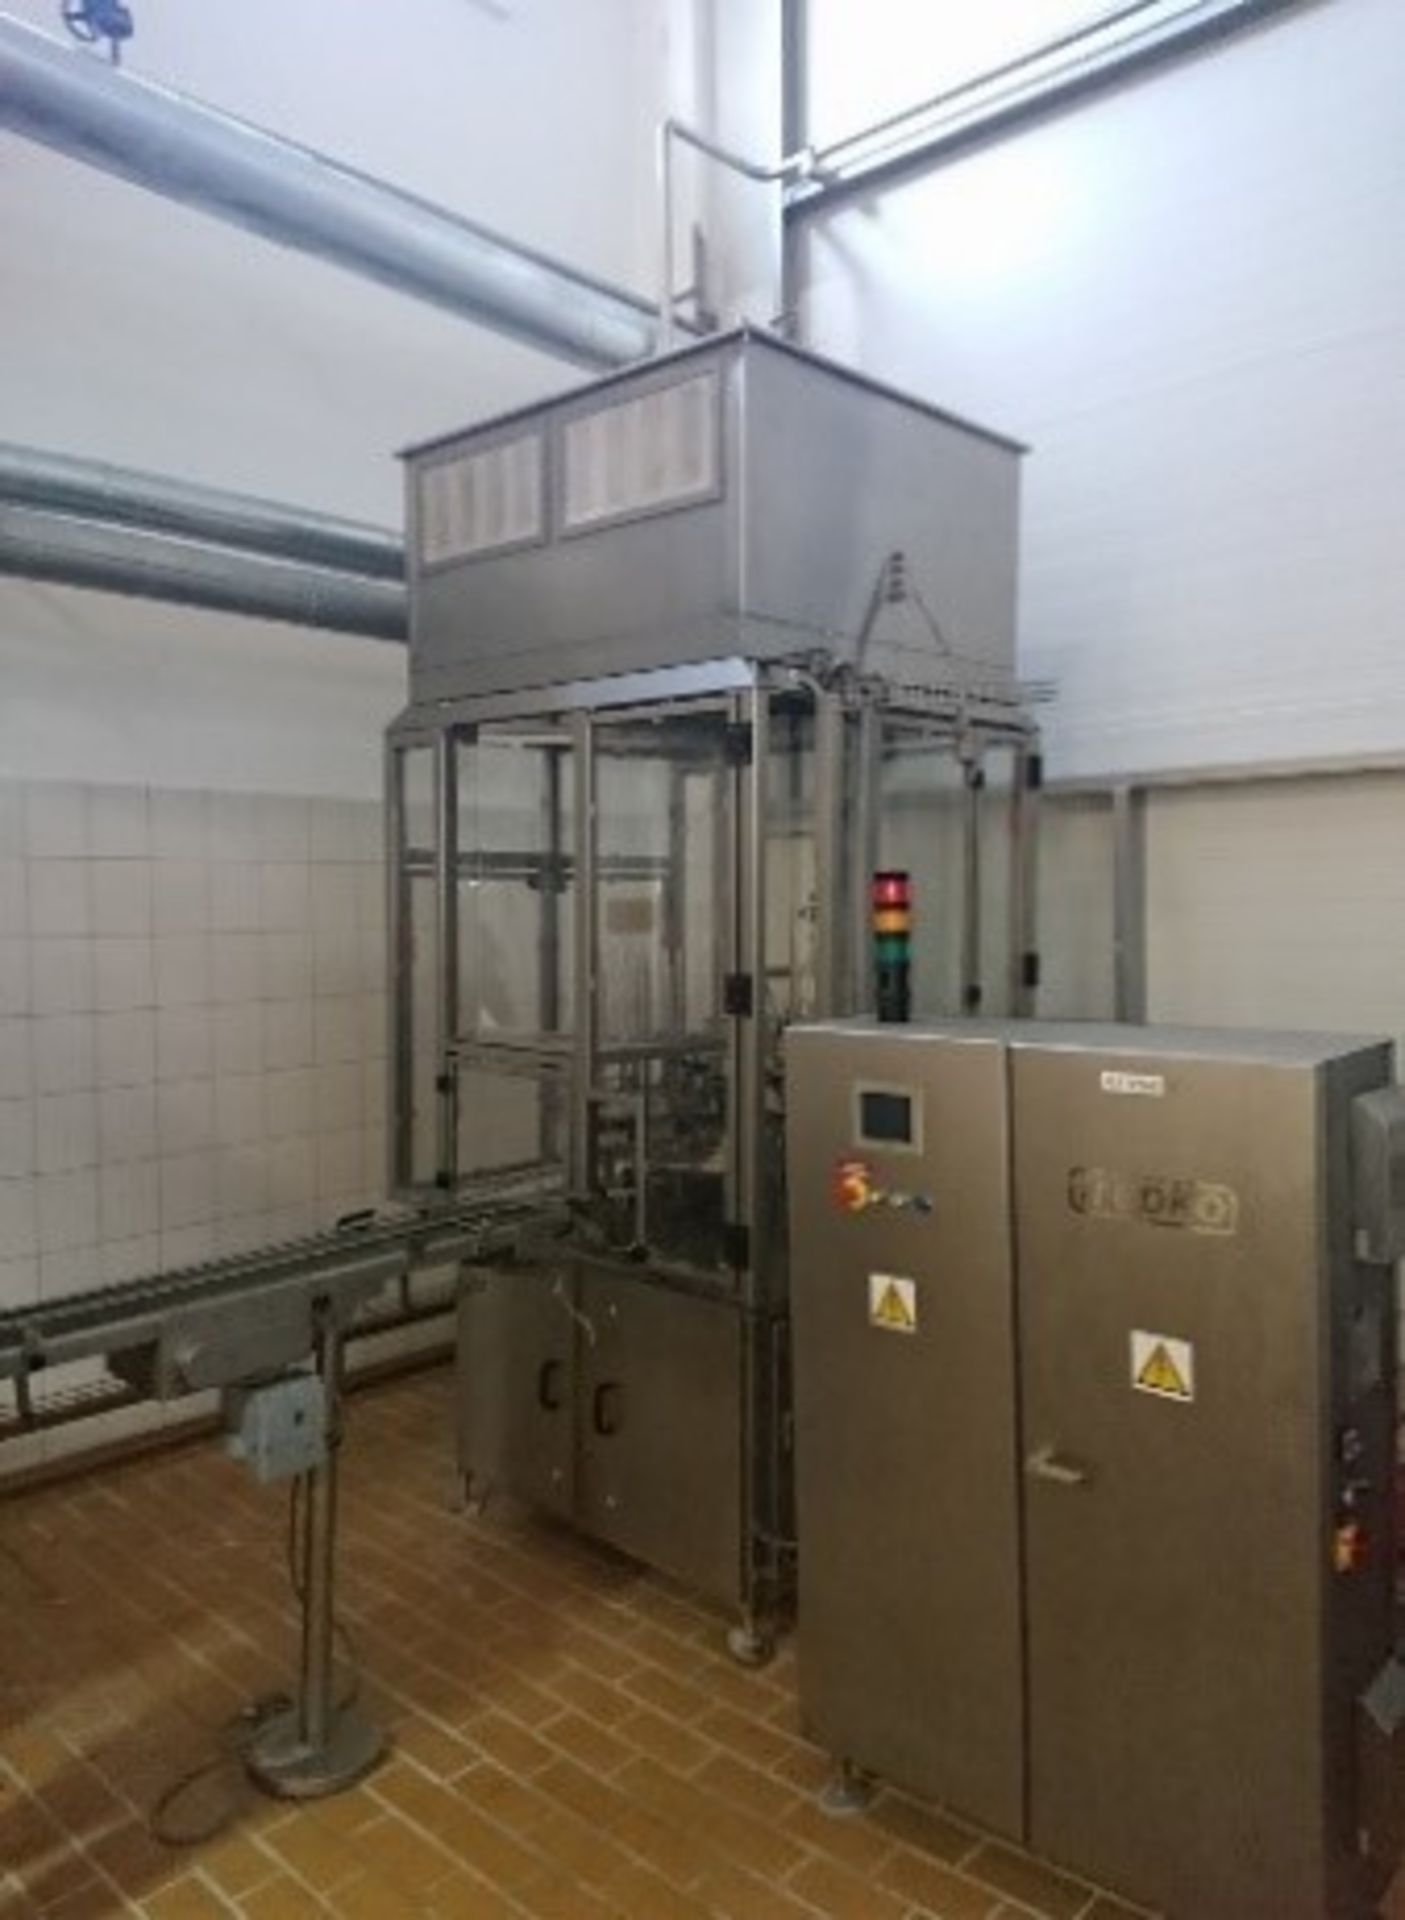 Tub filling machine for butter TREPKO 222KPS - direct connection 2004. LOCATION LITHUANIA